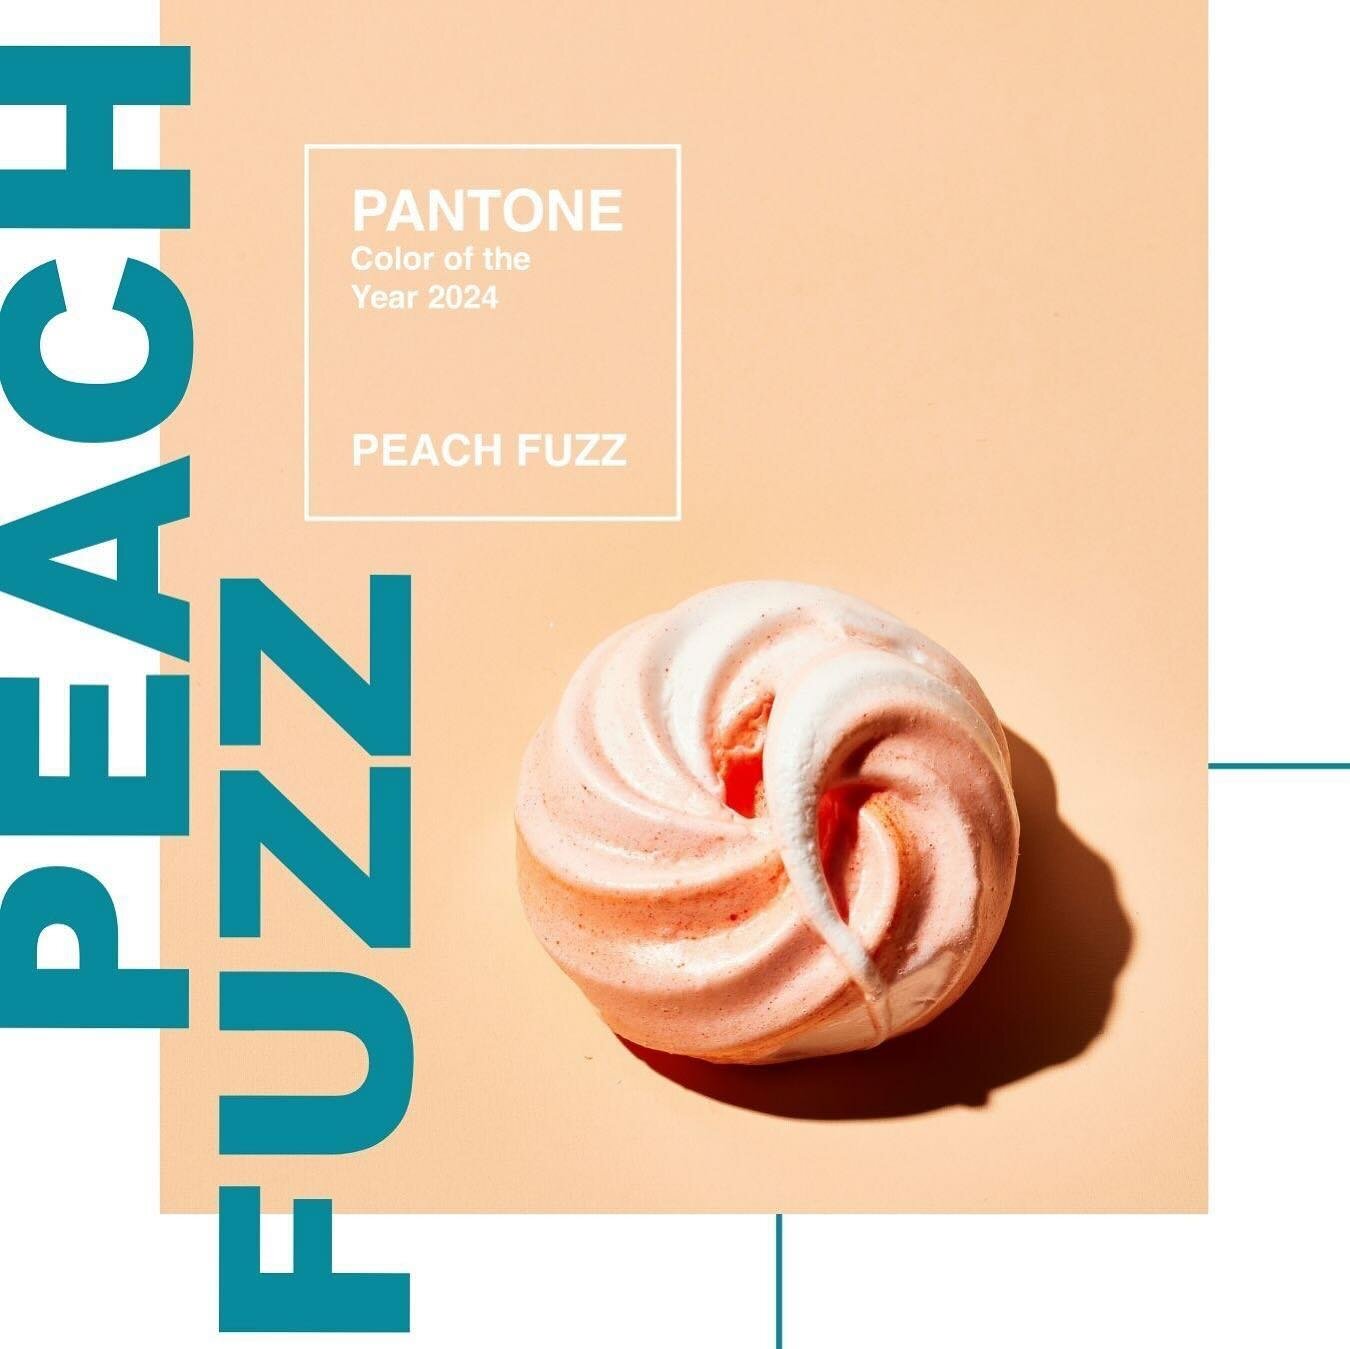 Food stylist and pastry chef @hadleysui approached me with an exciting concept: capturing the essence of the @pantone Color of the Year 2024, affectionately named Peach Fuzz, through food photography. 

Following a lively brainstorming session, we de